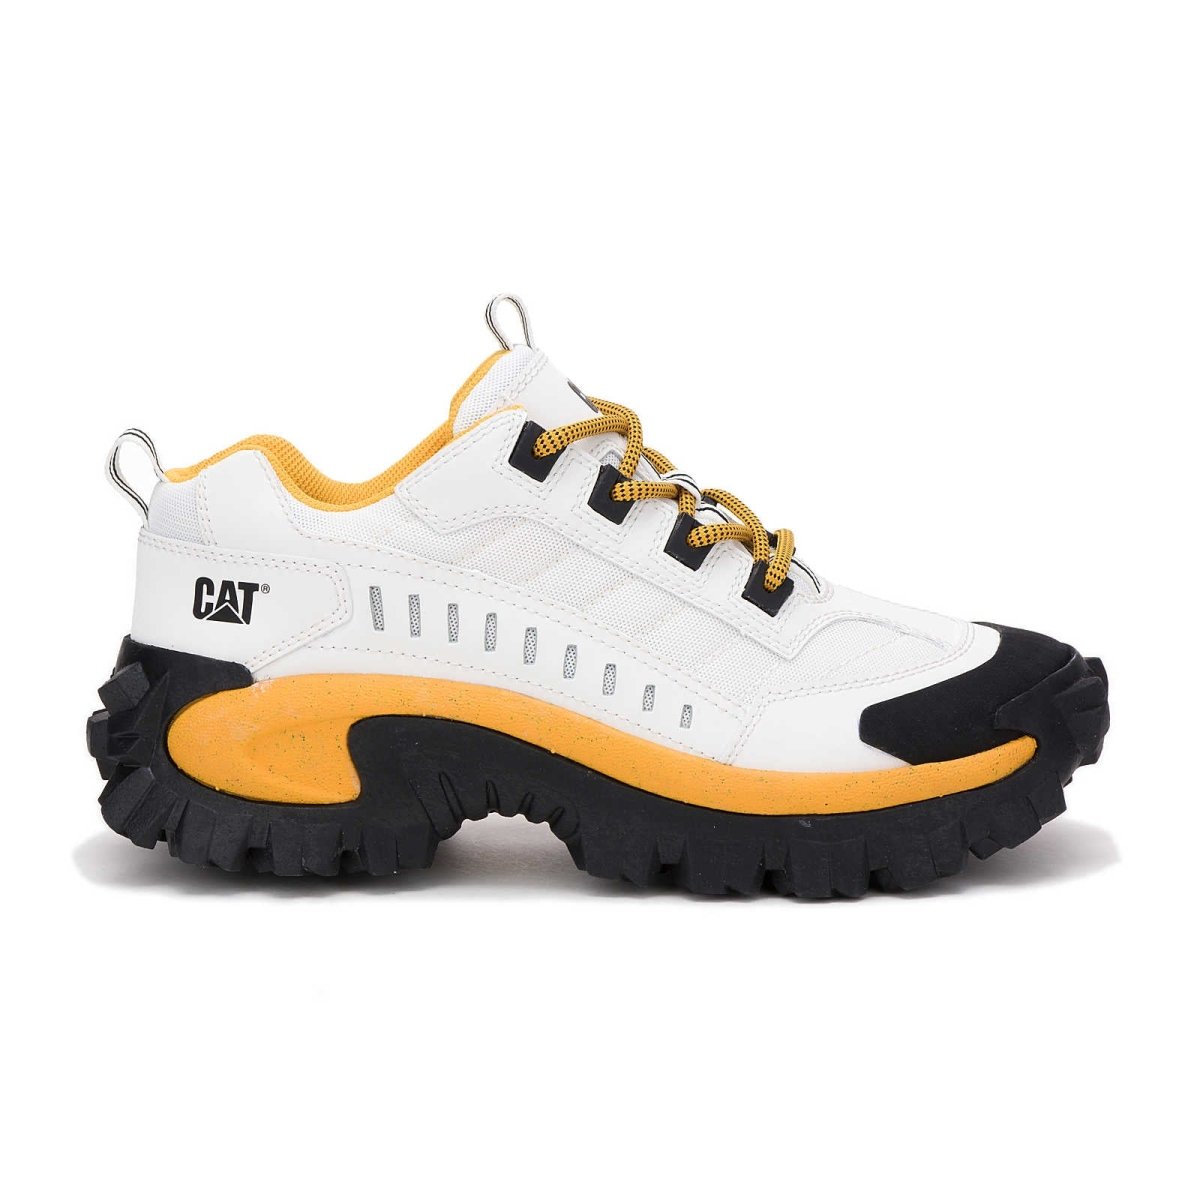 CATERPILLAR INTRUDER UNISEX SHOE (P723902) IN STAR WHITE - TLW Shoes